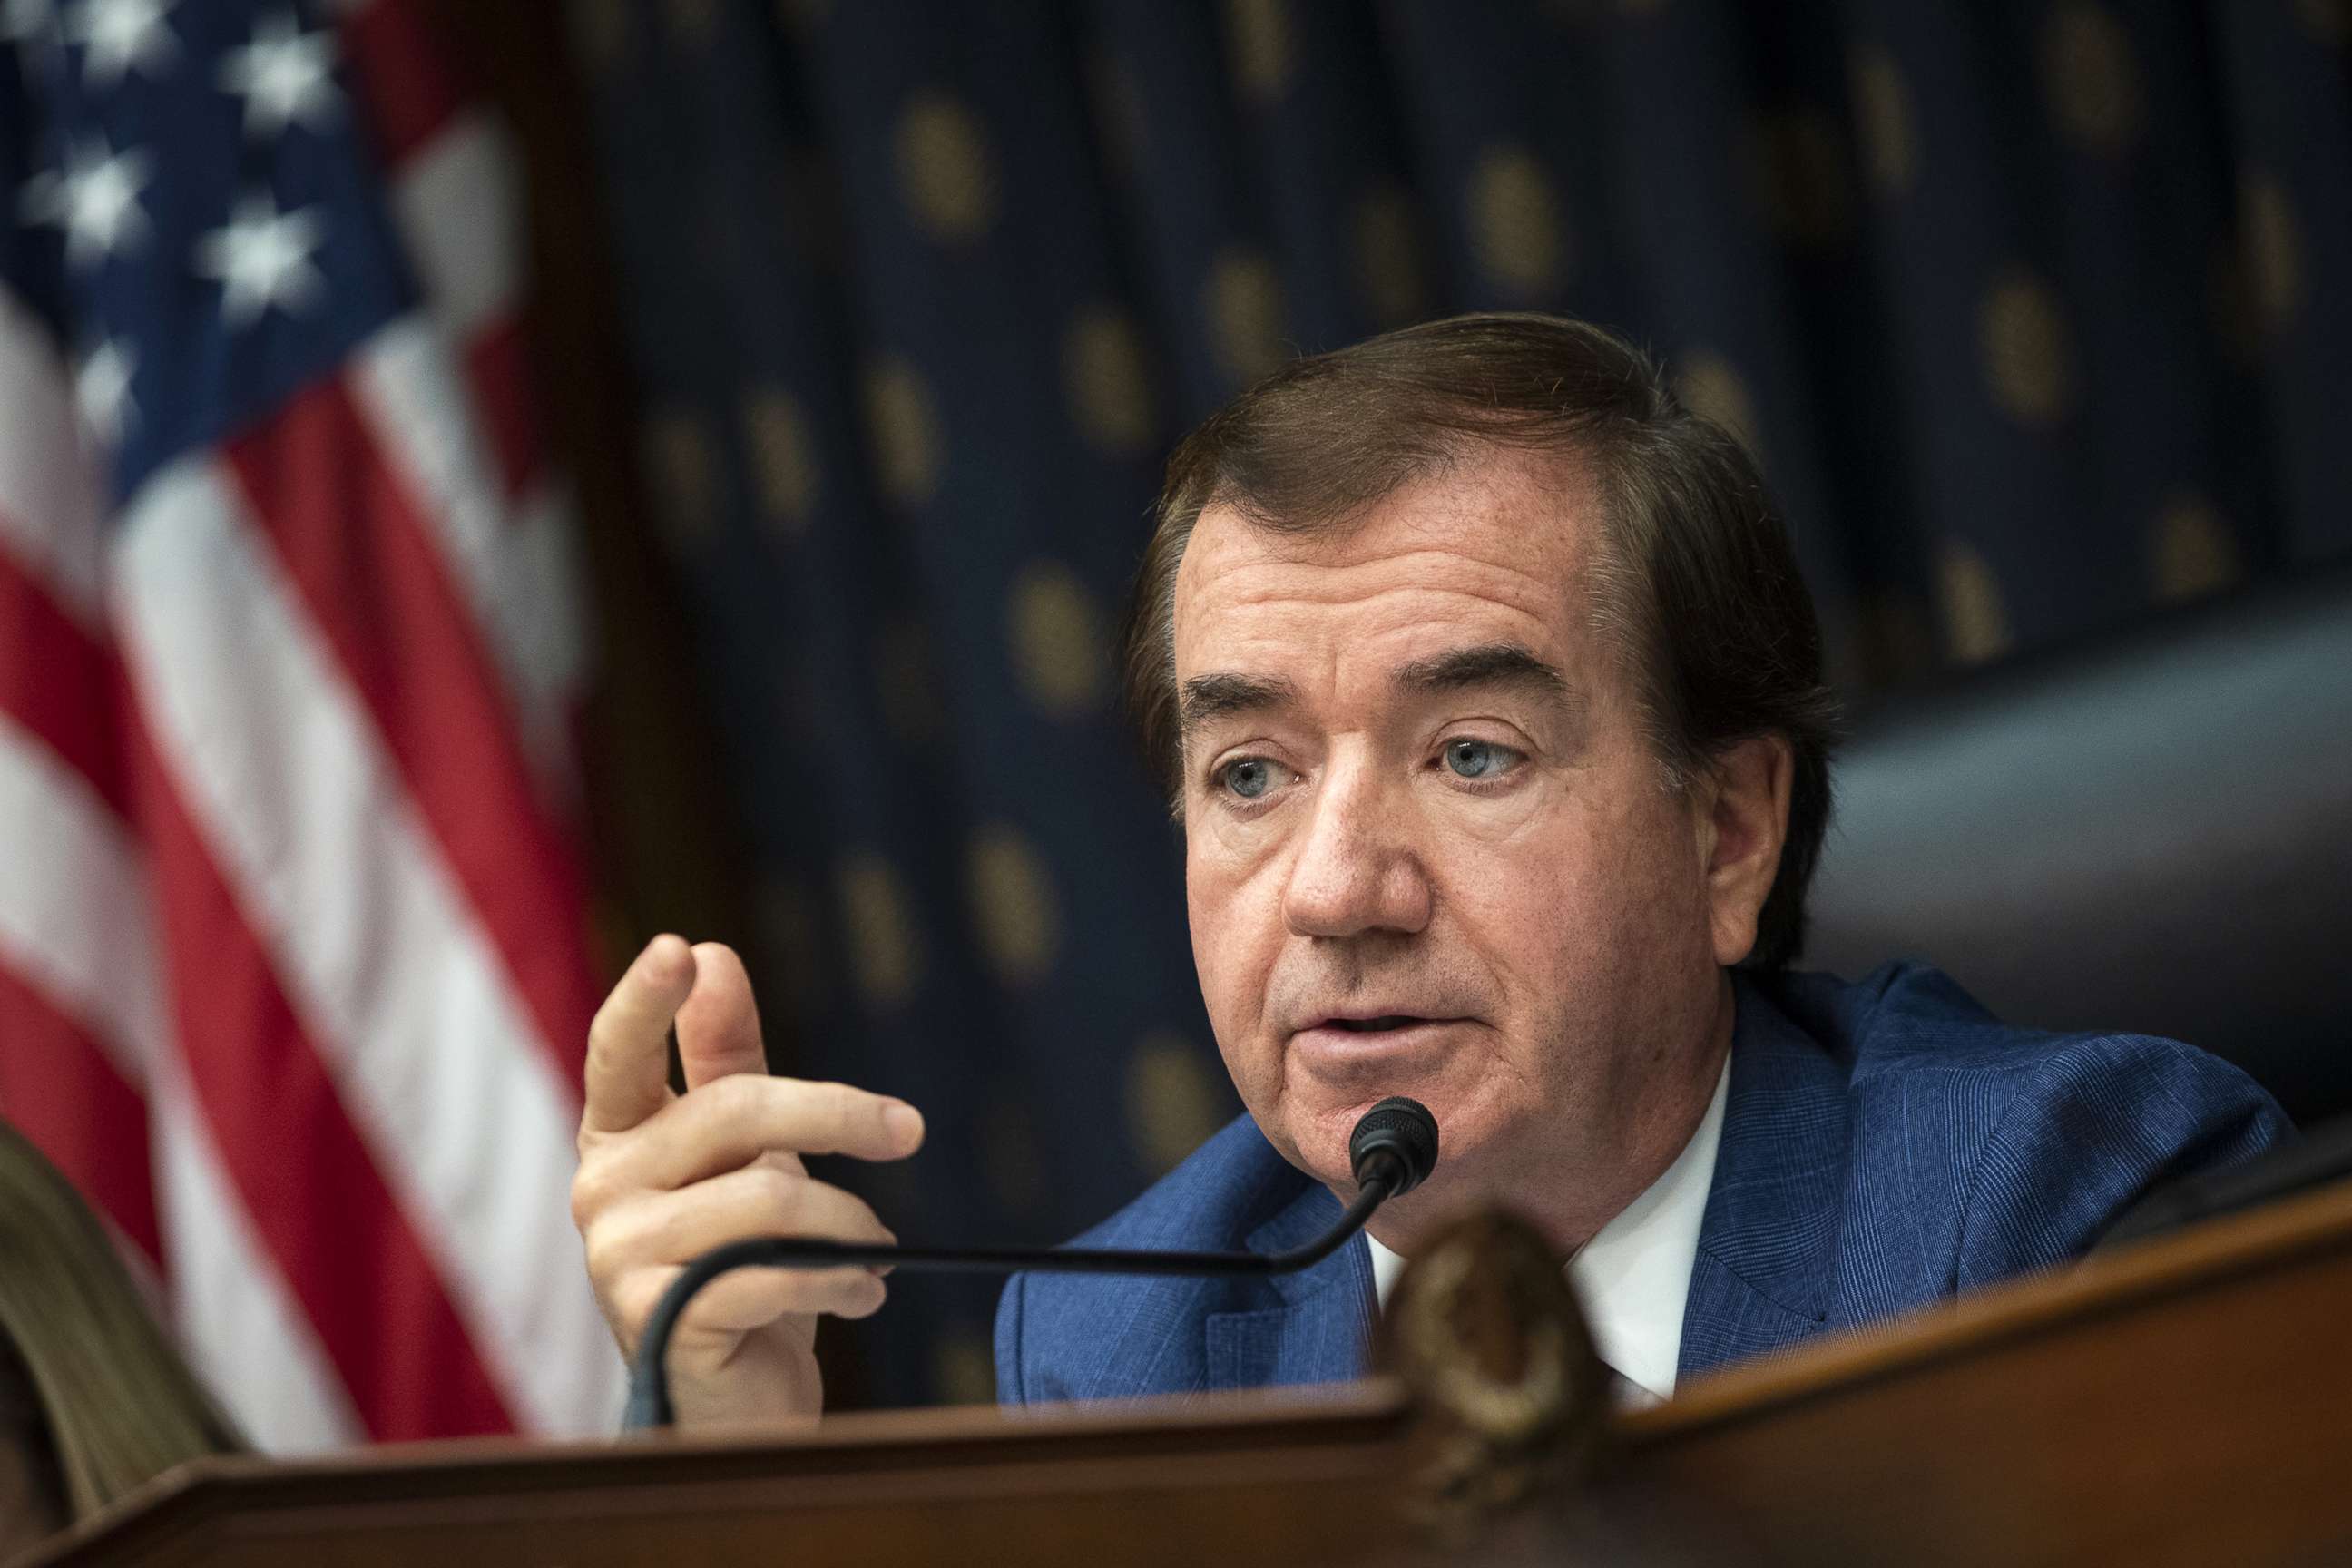 PHOTO: Committee chairman Rep. Ed Royce speaks during a House Foreign Affairs Committee hearing on Capitol Hill, Sept. 26, 2018 in Washington.